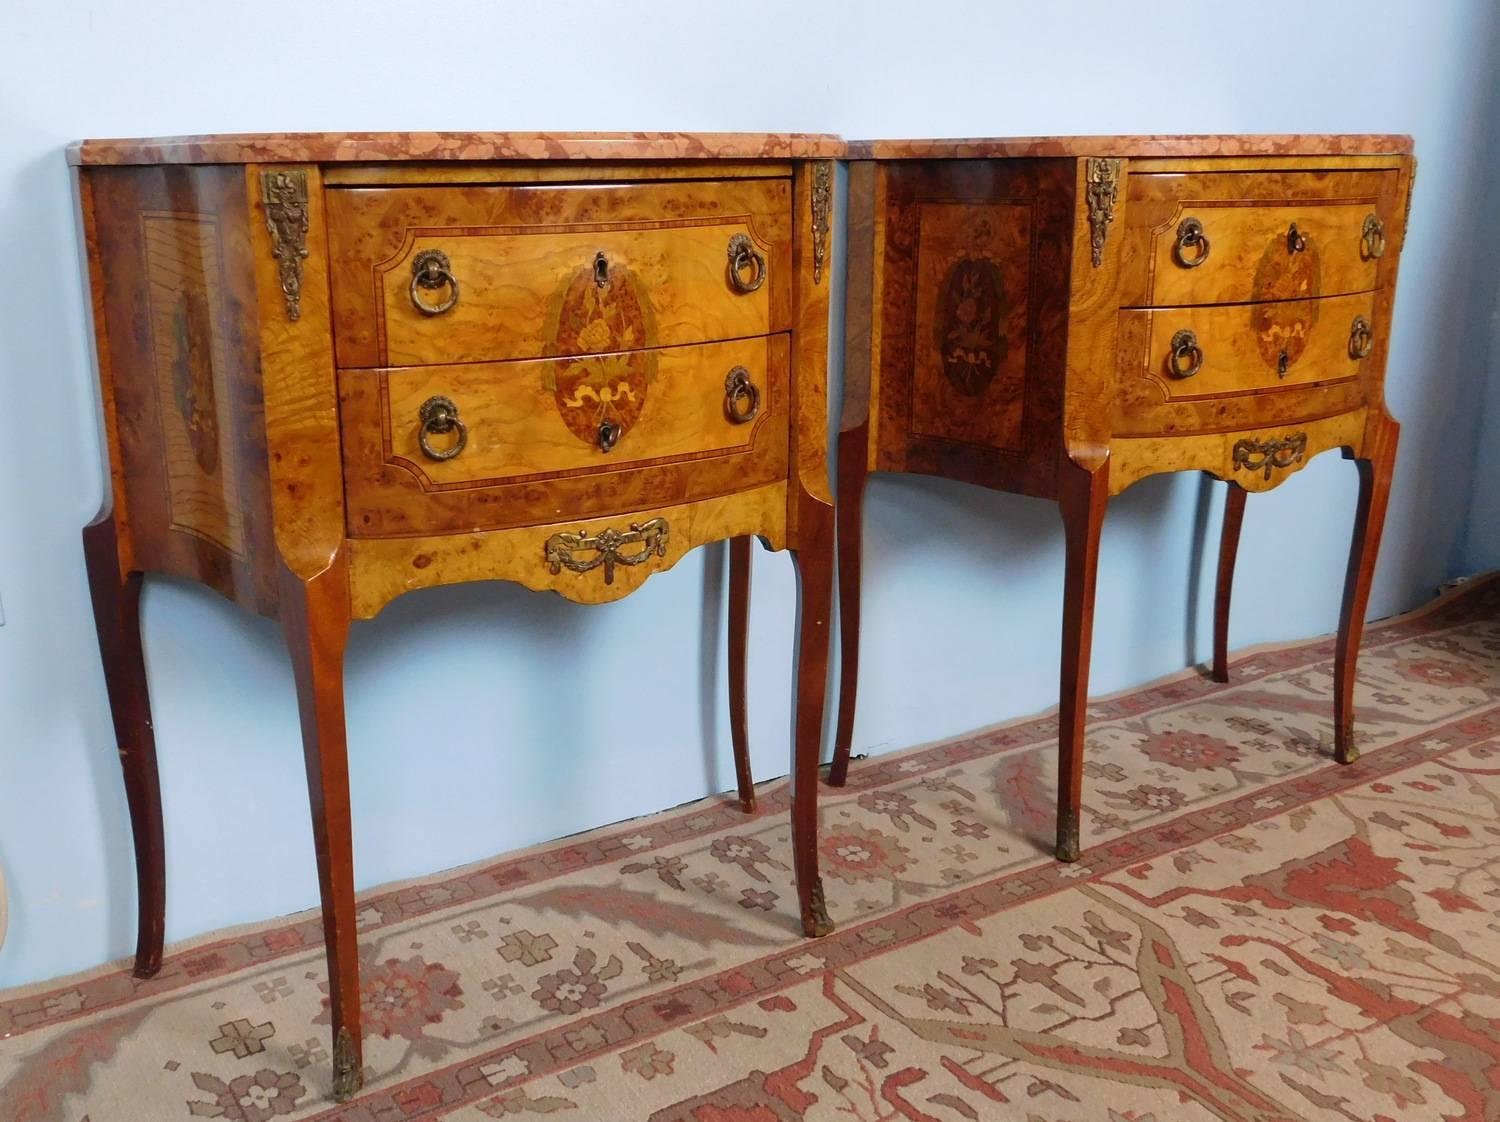 Pair of French inlaid satinwood and bronze mounted two drawer bombe formed side tables, c1930. Shaped rogue marble tops on a case of two banded and inlaid drawers and standing on tall cabriole style legs.